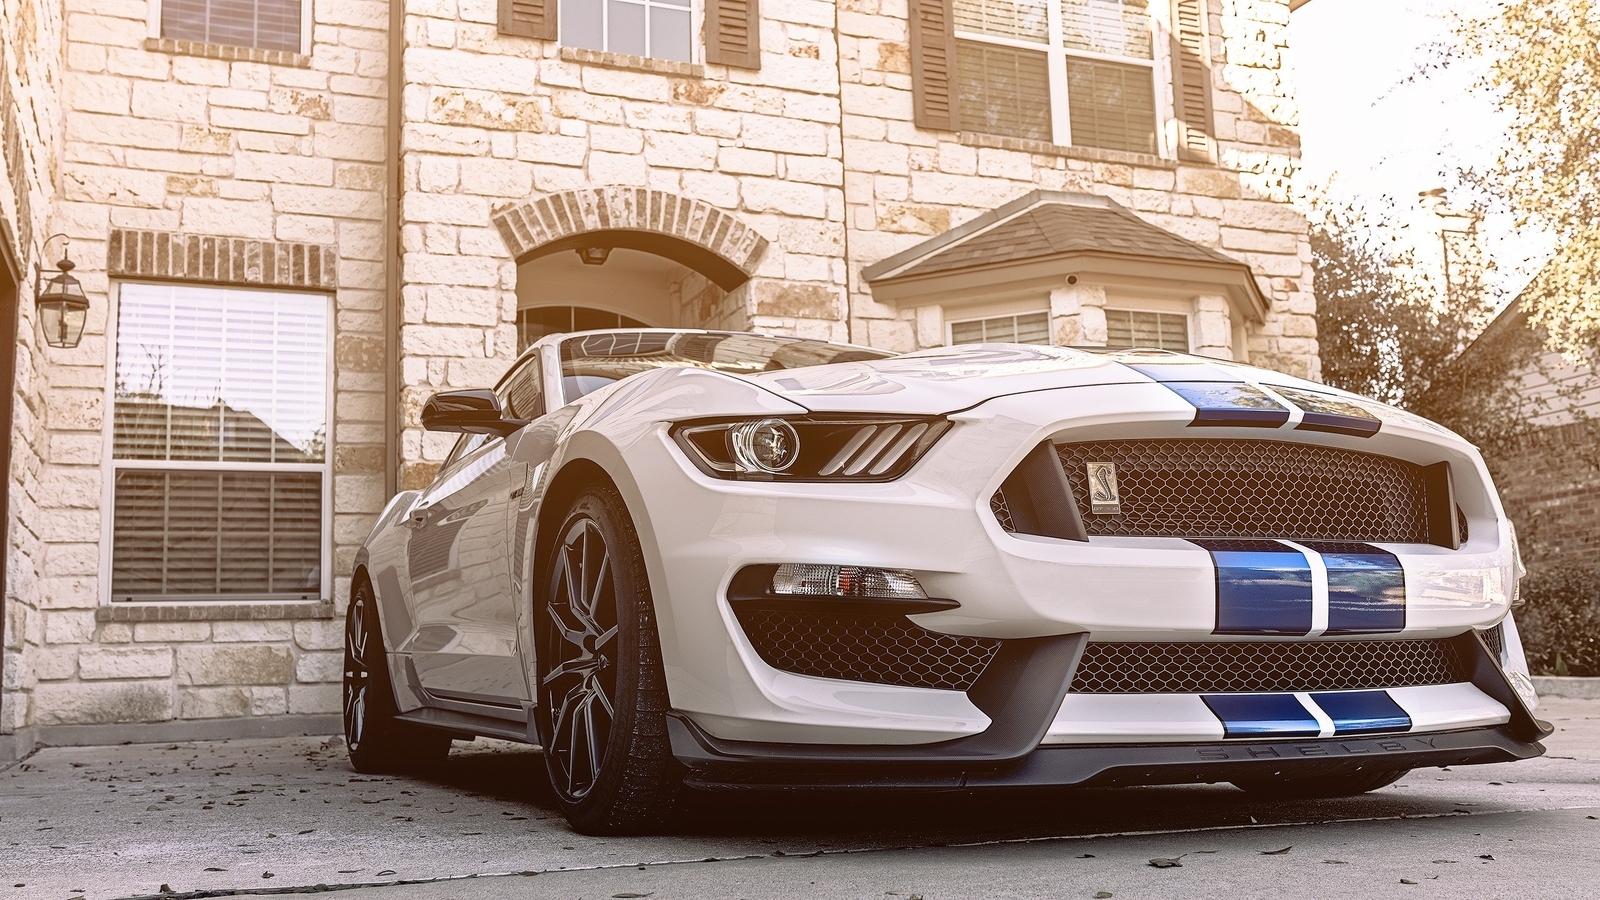 Image: Ford, Mustang, Shelby, GT350, white, building